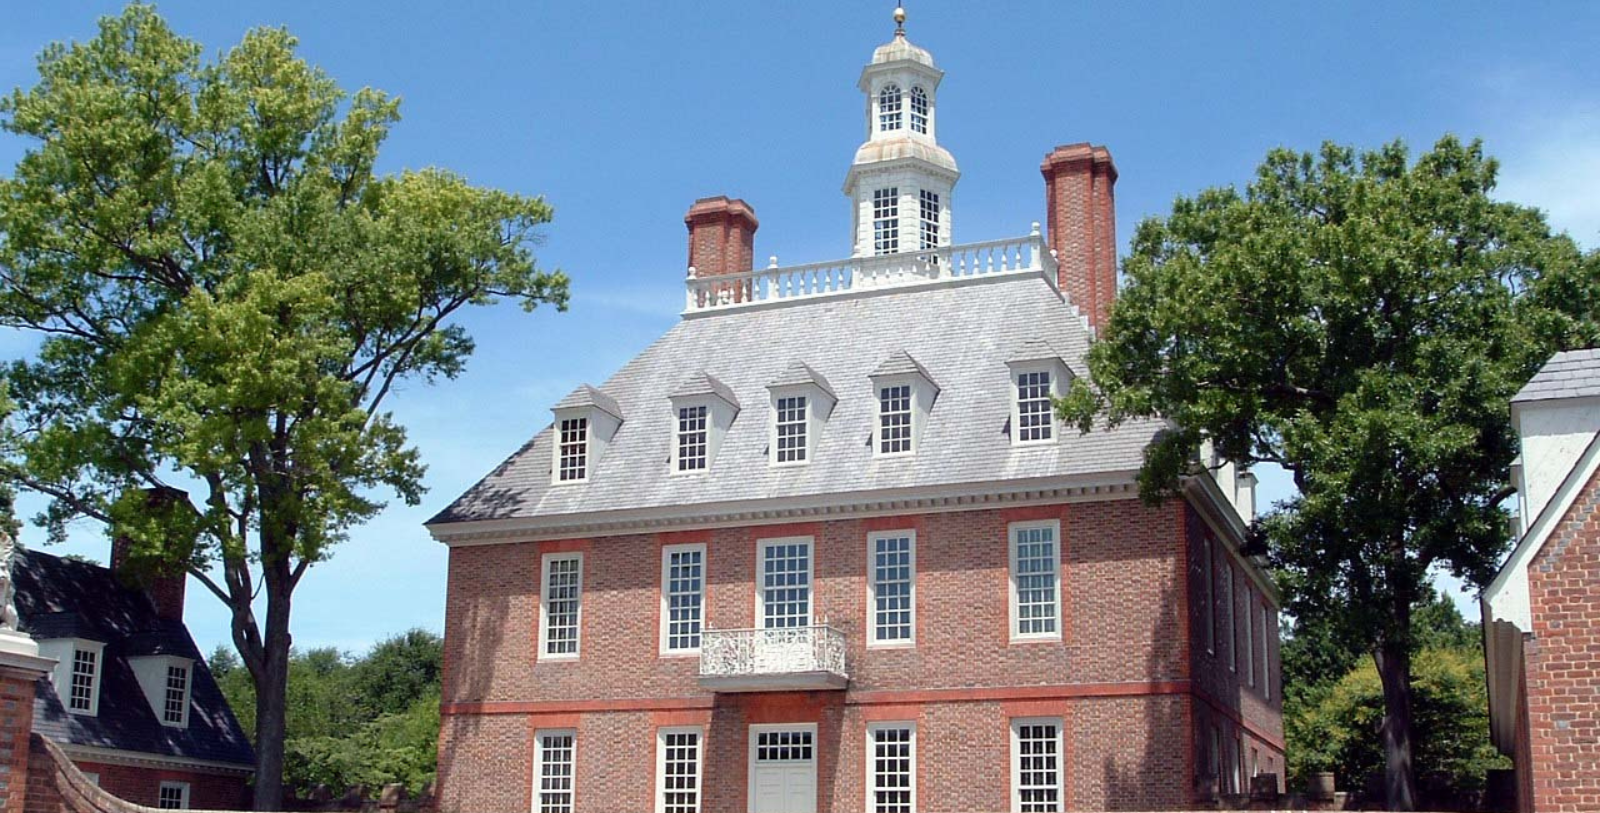 Explore the Governor’s Palace, the Colonial Williamsburg Courthouse, and the Great Hopes Plantation just steps away.